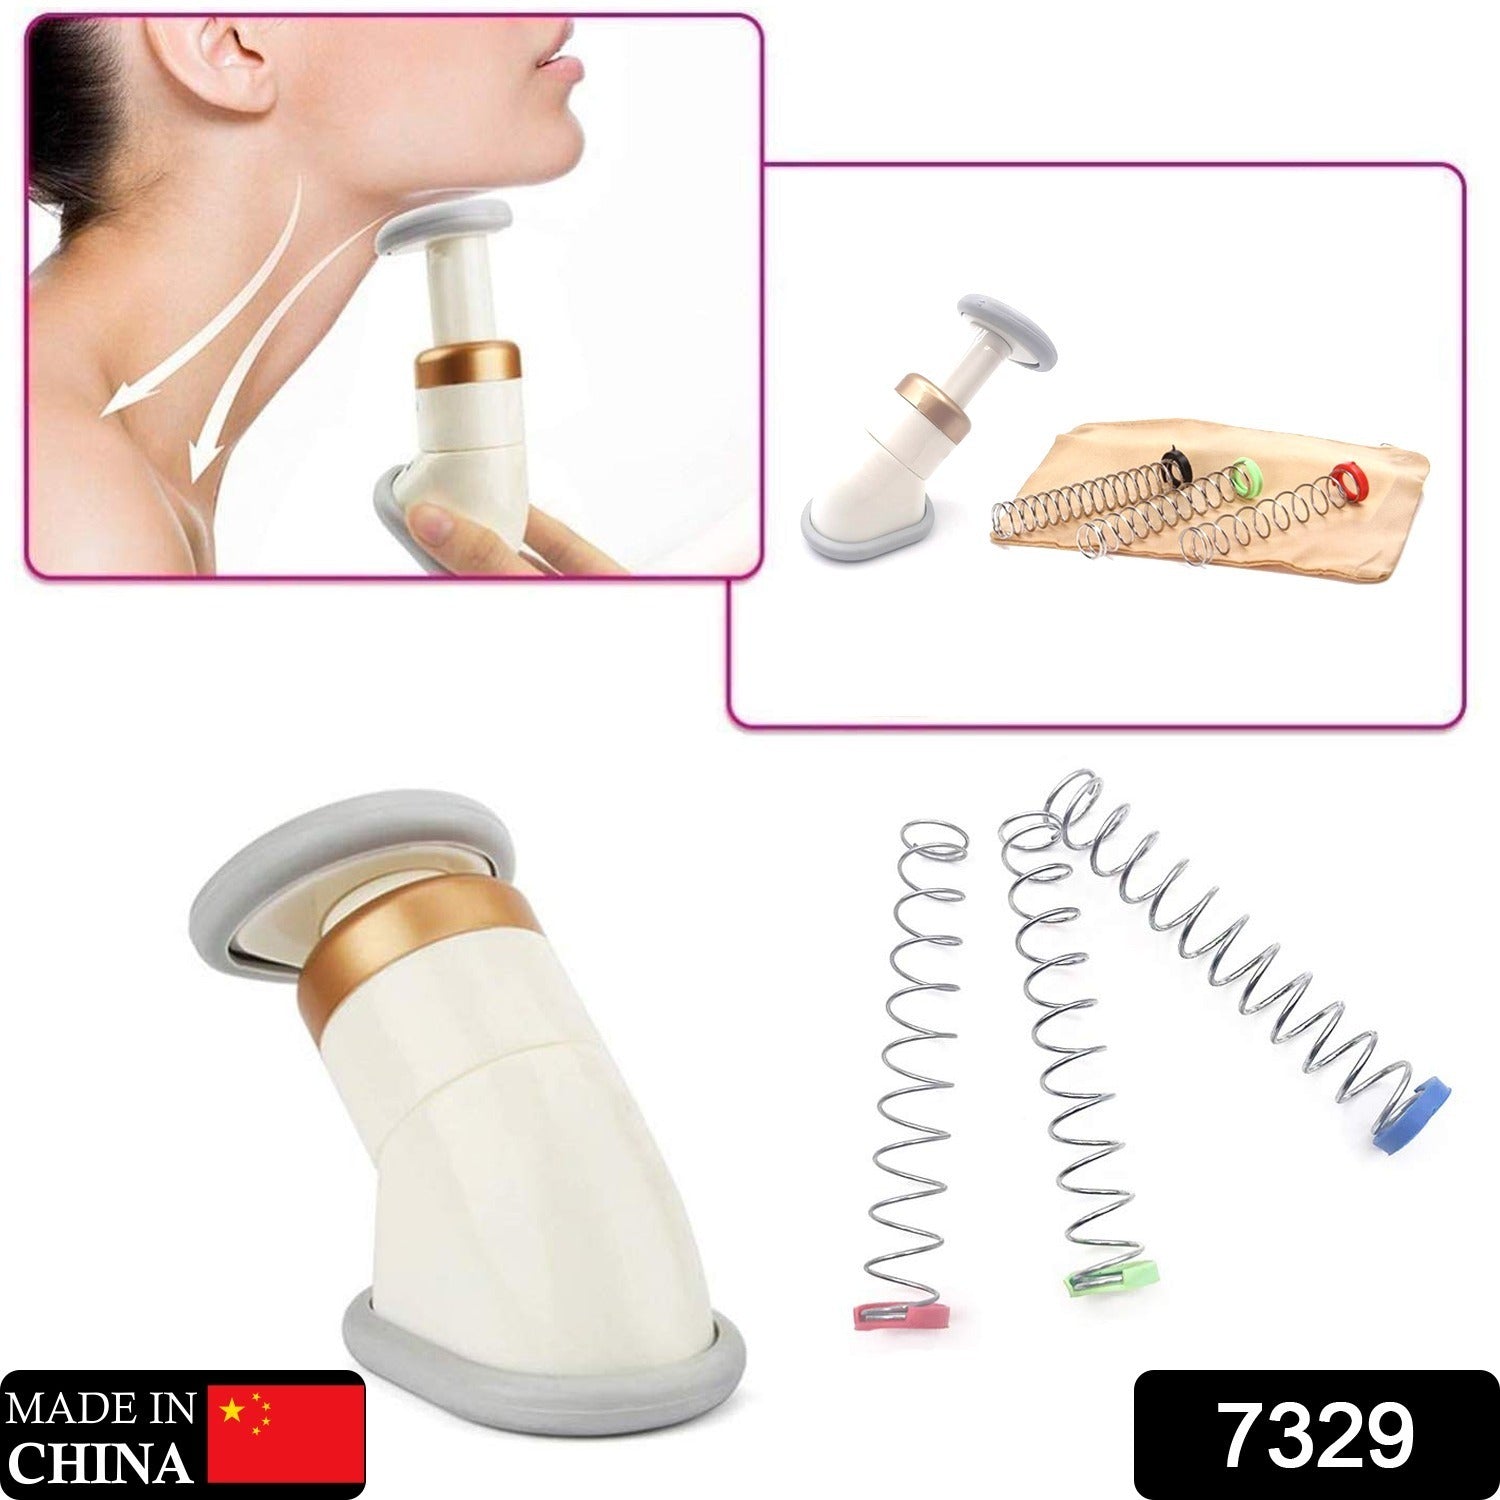 7329 Massager for Men Women Double Chin Up Neckline Slimmer Machine and jawline Exerciser Tool with Neck Slimming Rubber & Chinfat Reducer Exerciser (1 Pc)